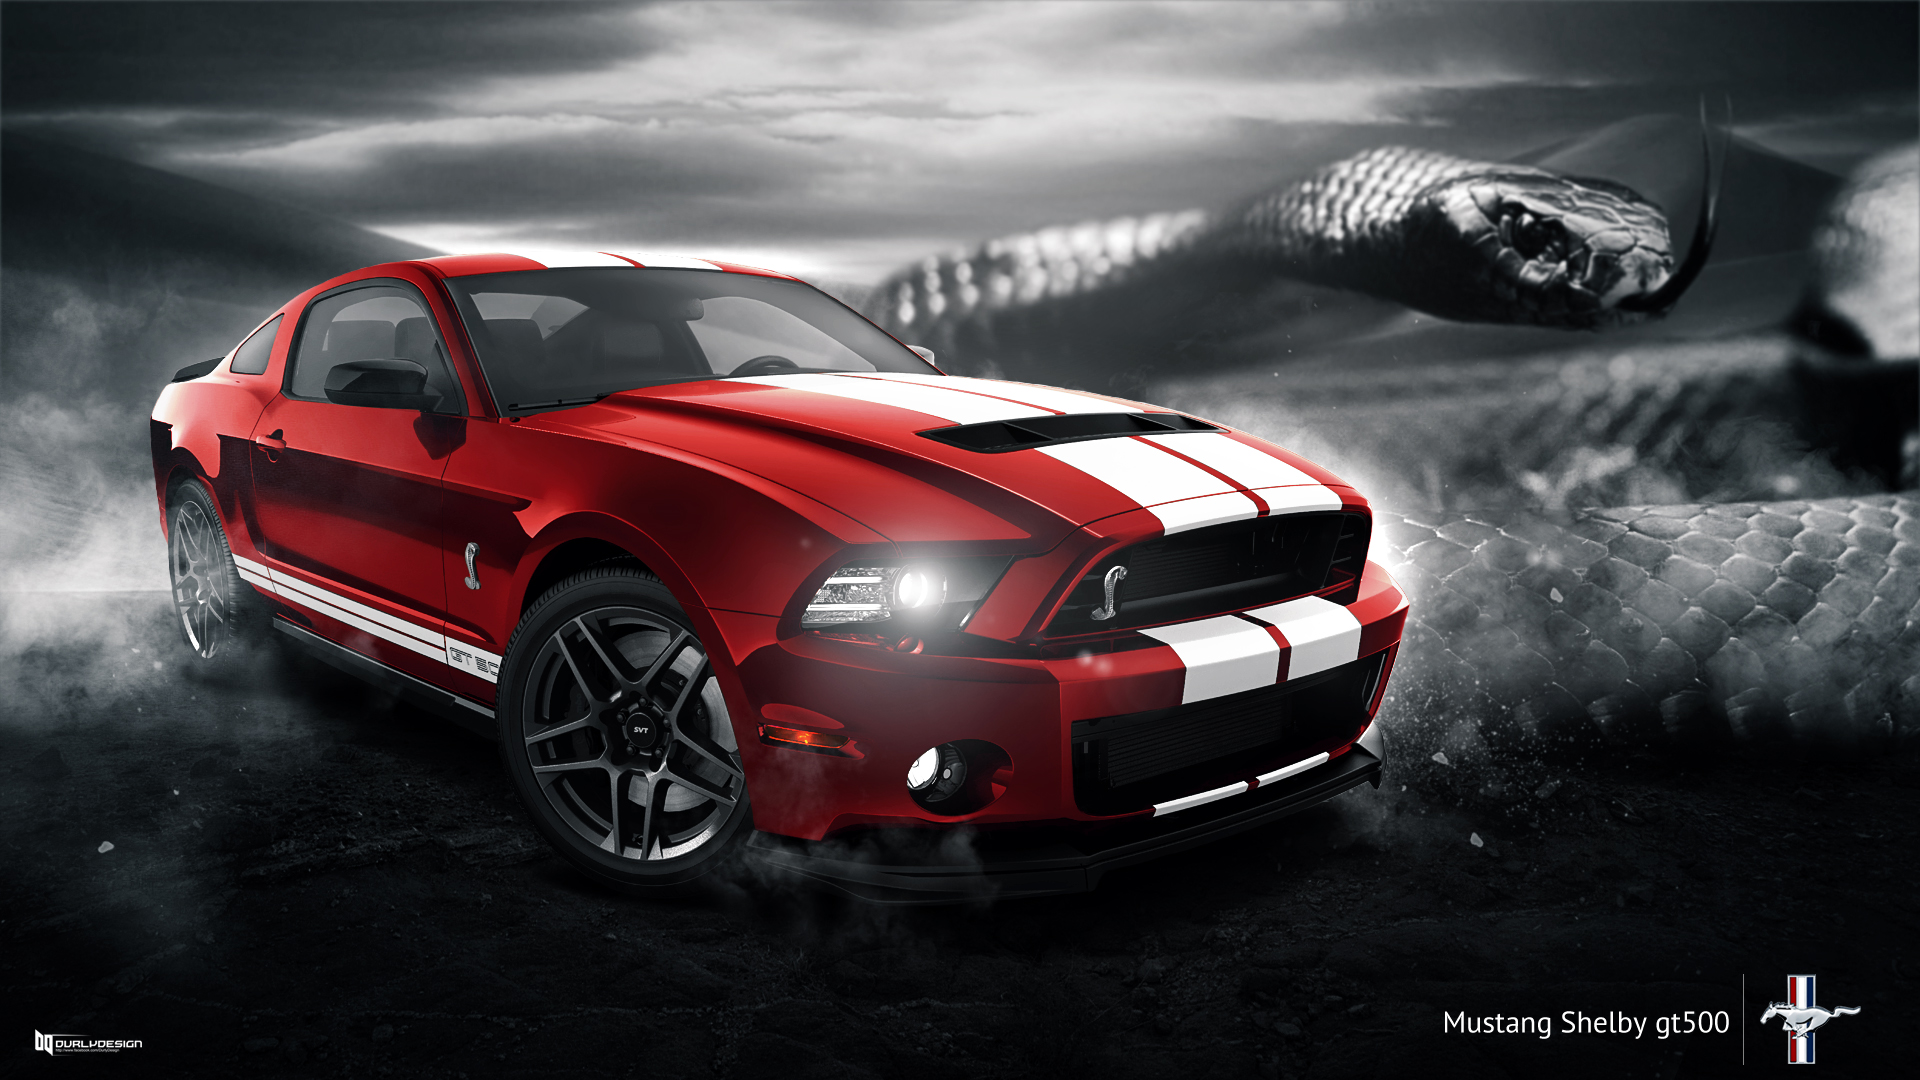 Red Ford Mustang Shelby Wallpaper Full HD Pictures